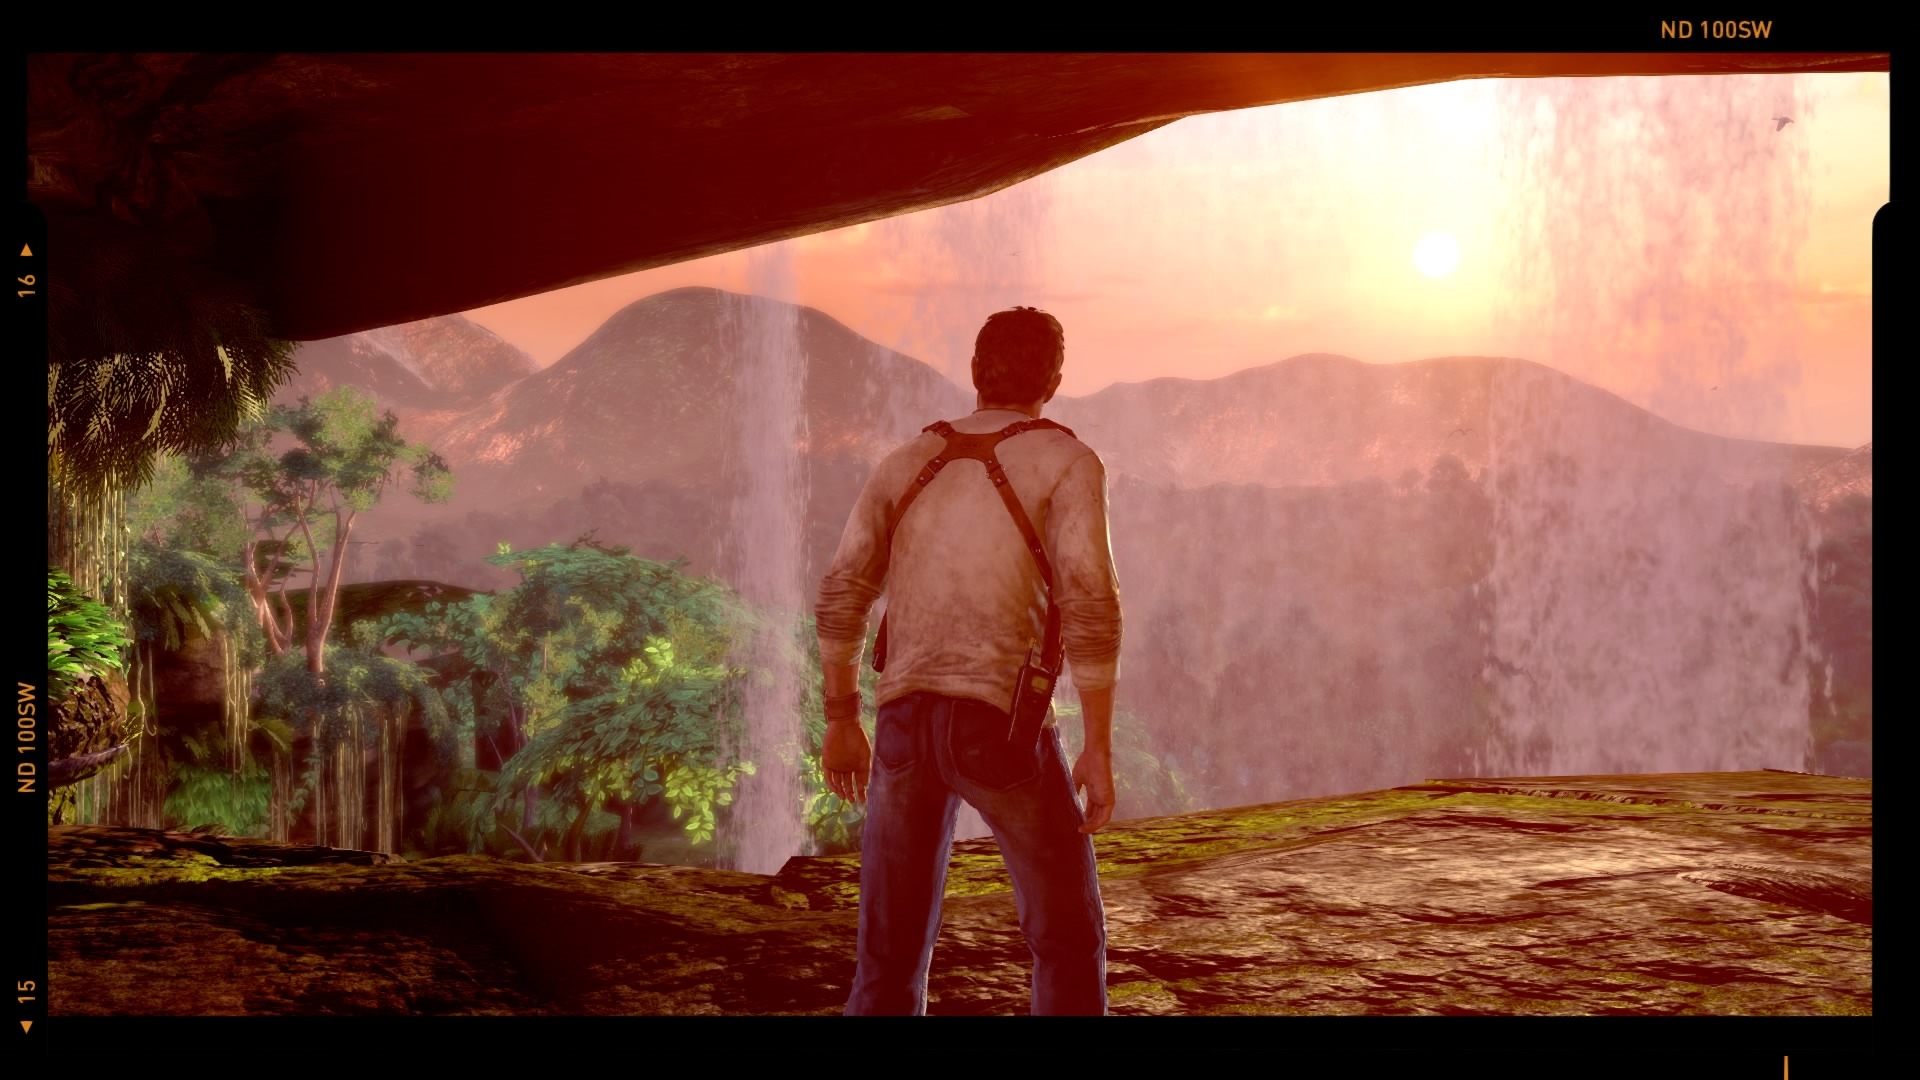 Uncharted: The Nathan Drake Collection S fotoreimom mete op vytvra podobne psobiv obrzky.